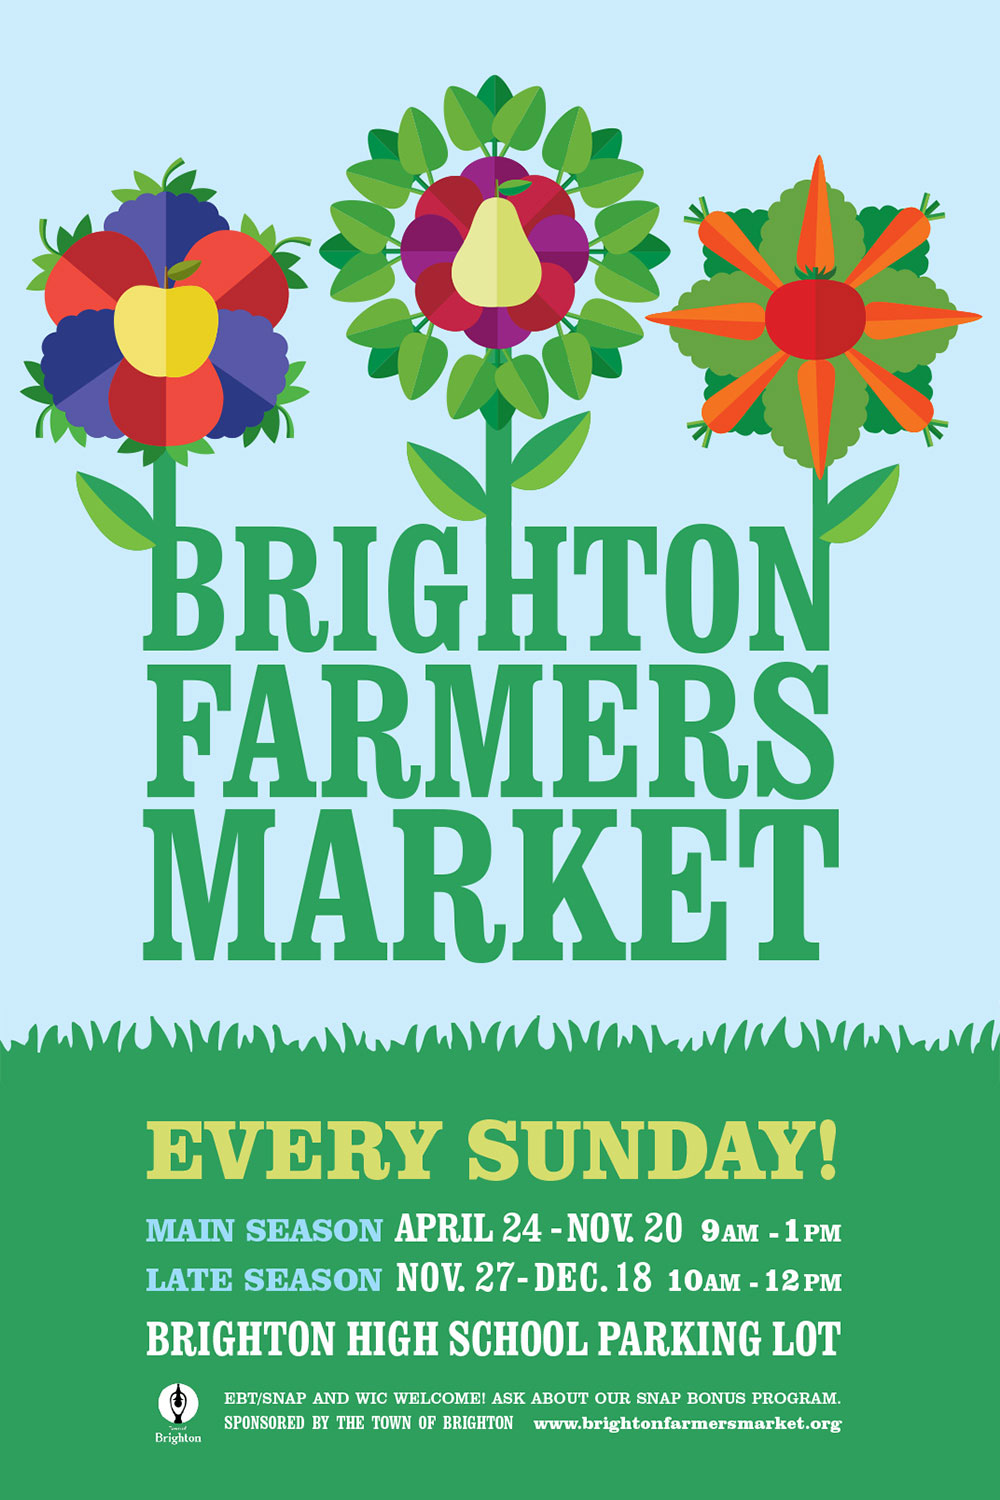 CLIENT:Brighton Farmers Market

DATE:May 2022

PROJECT:Poster for farmers market